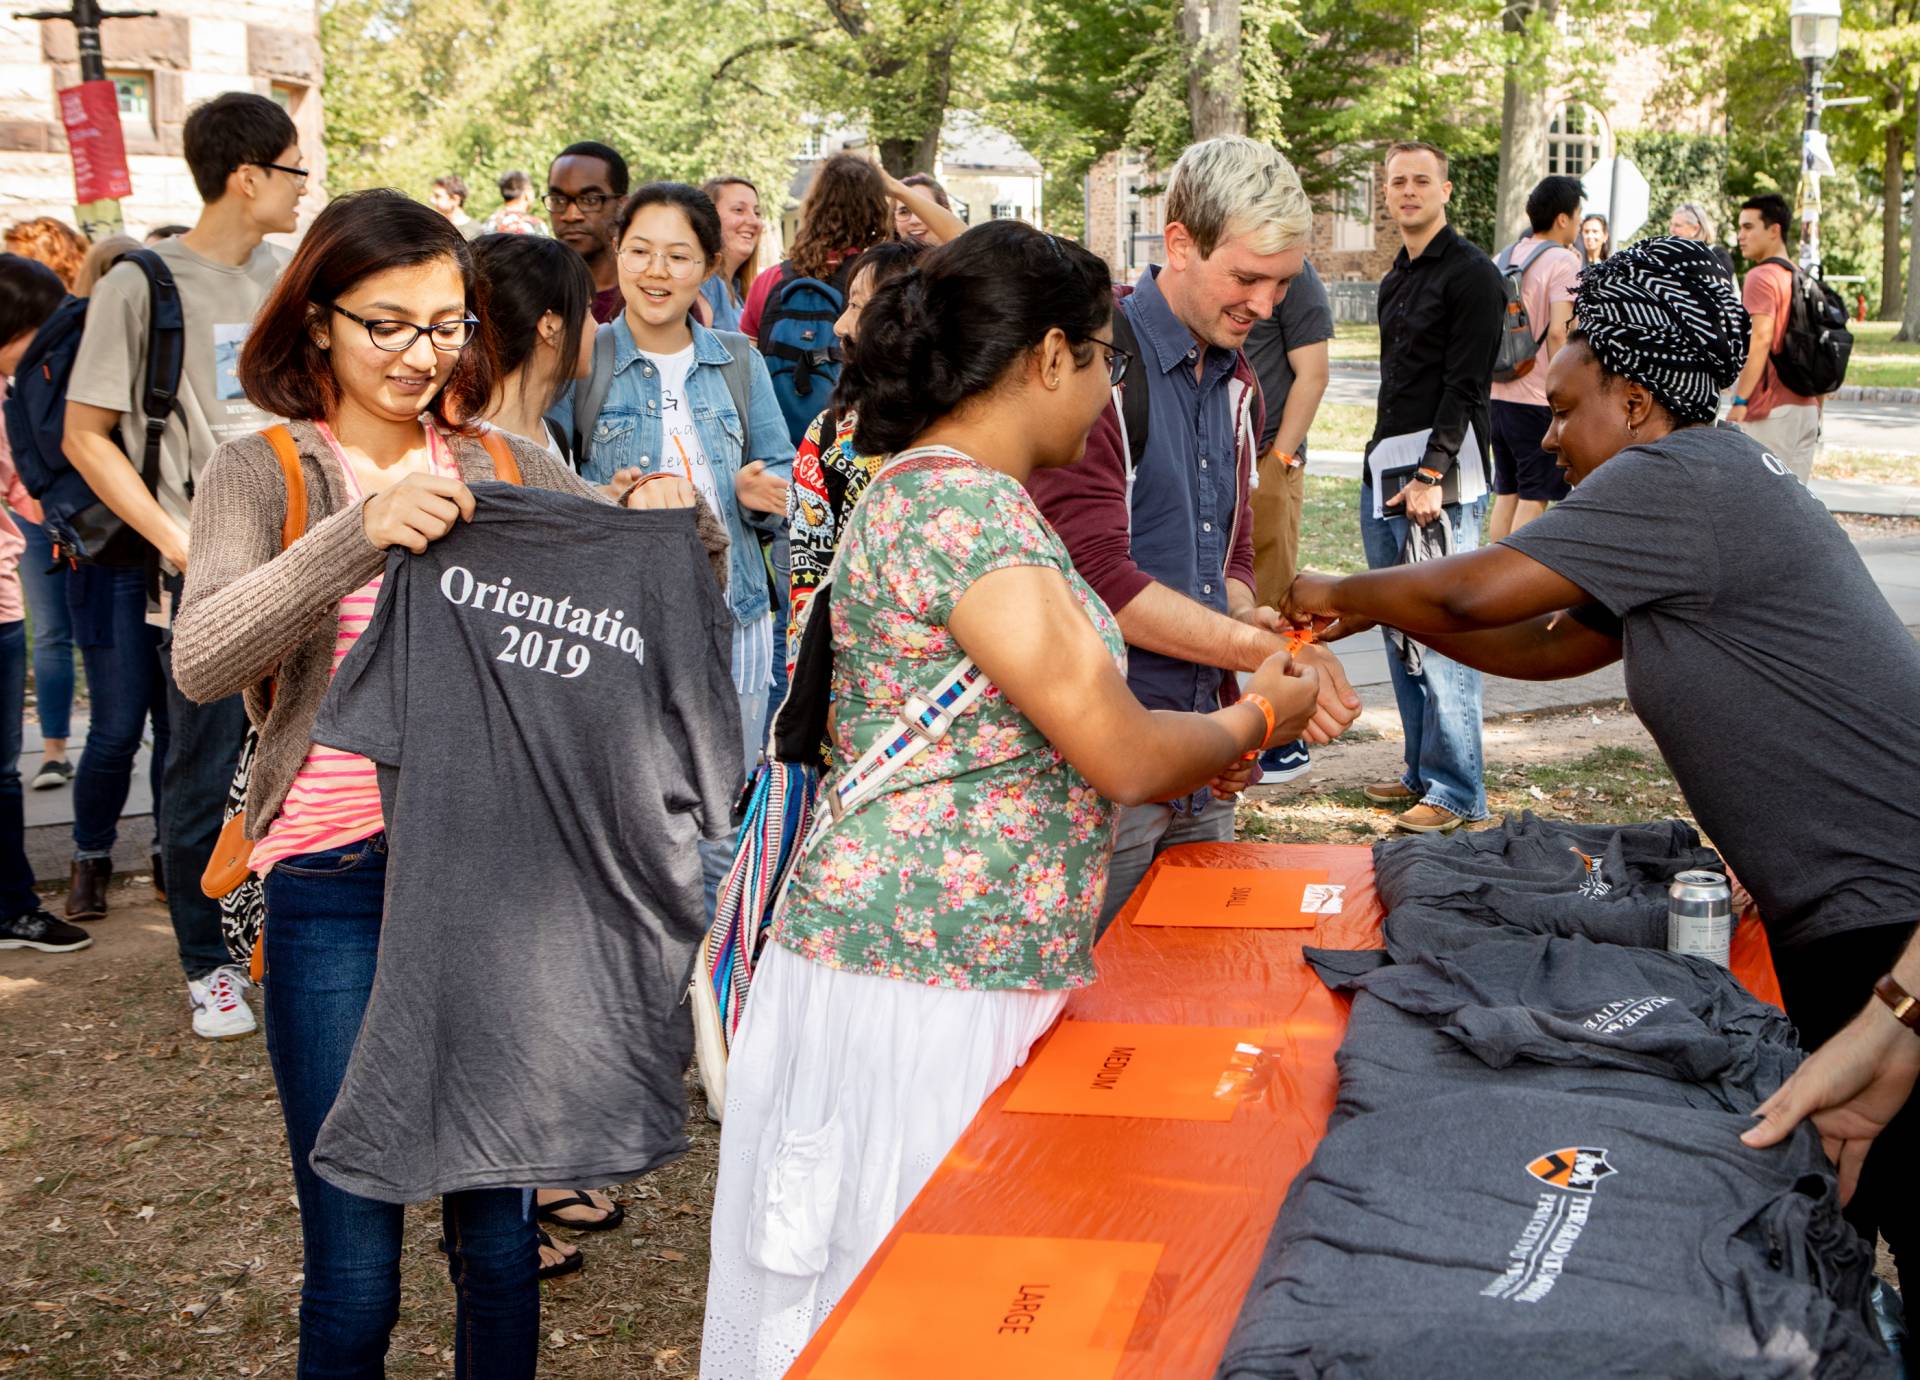 Students picking up t-shirts at a table